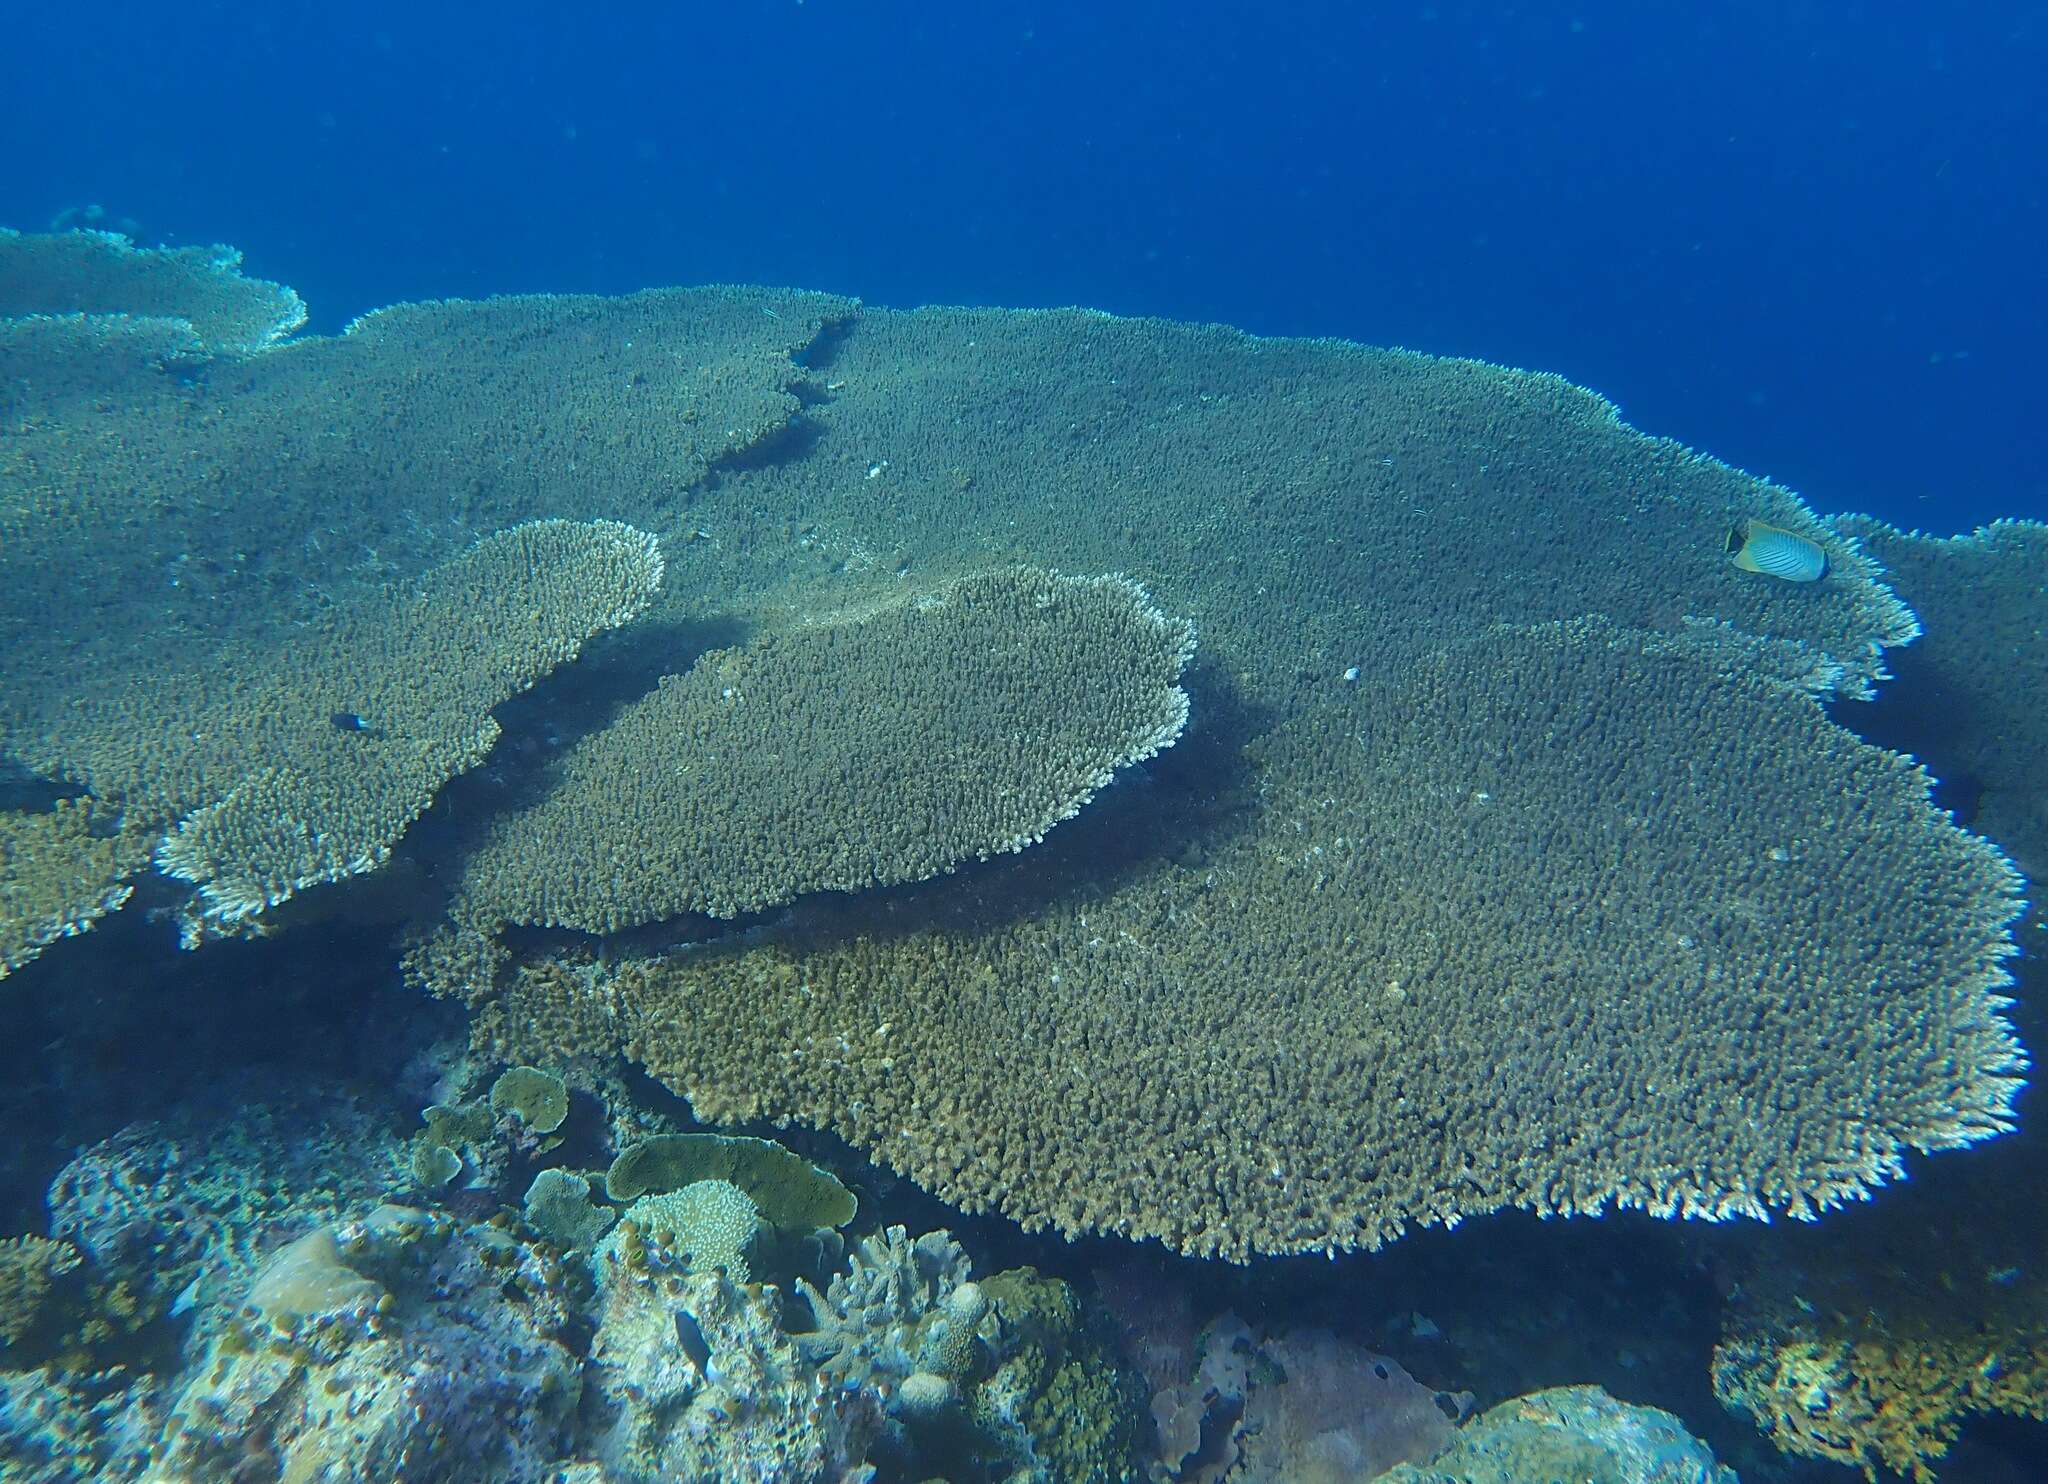 Staghorn coral - Encyclopedia of Life